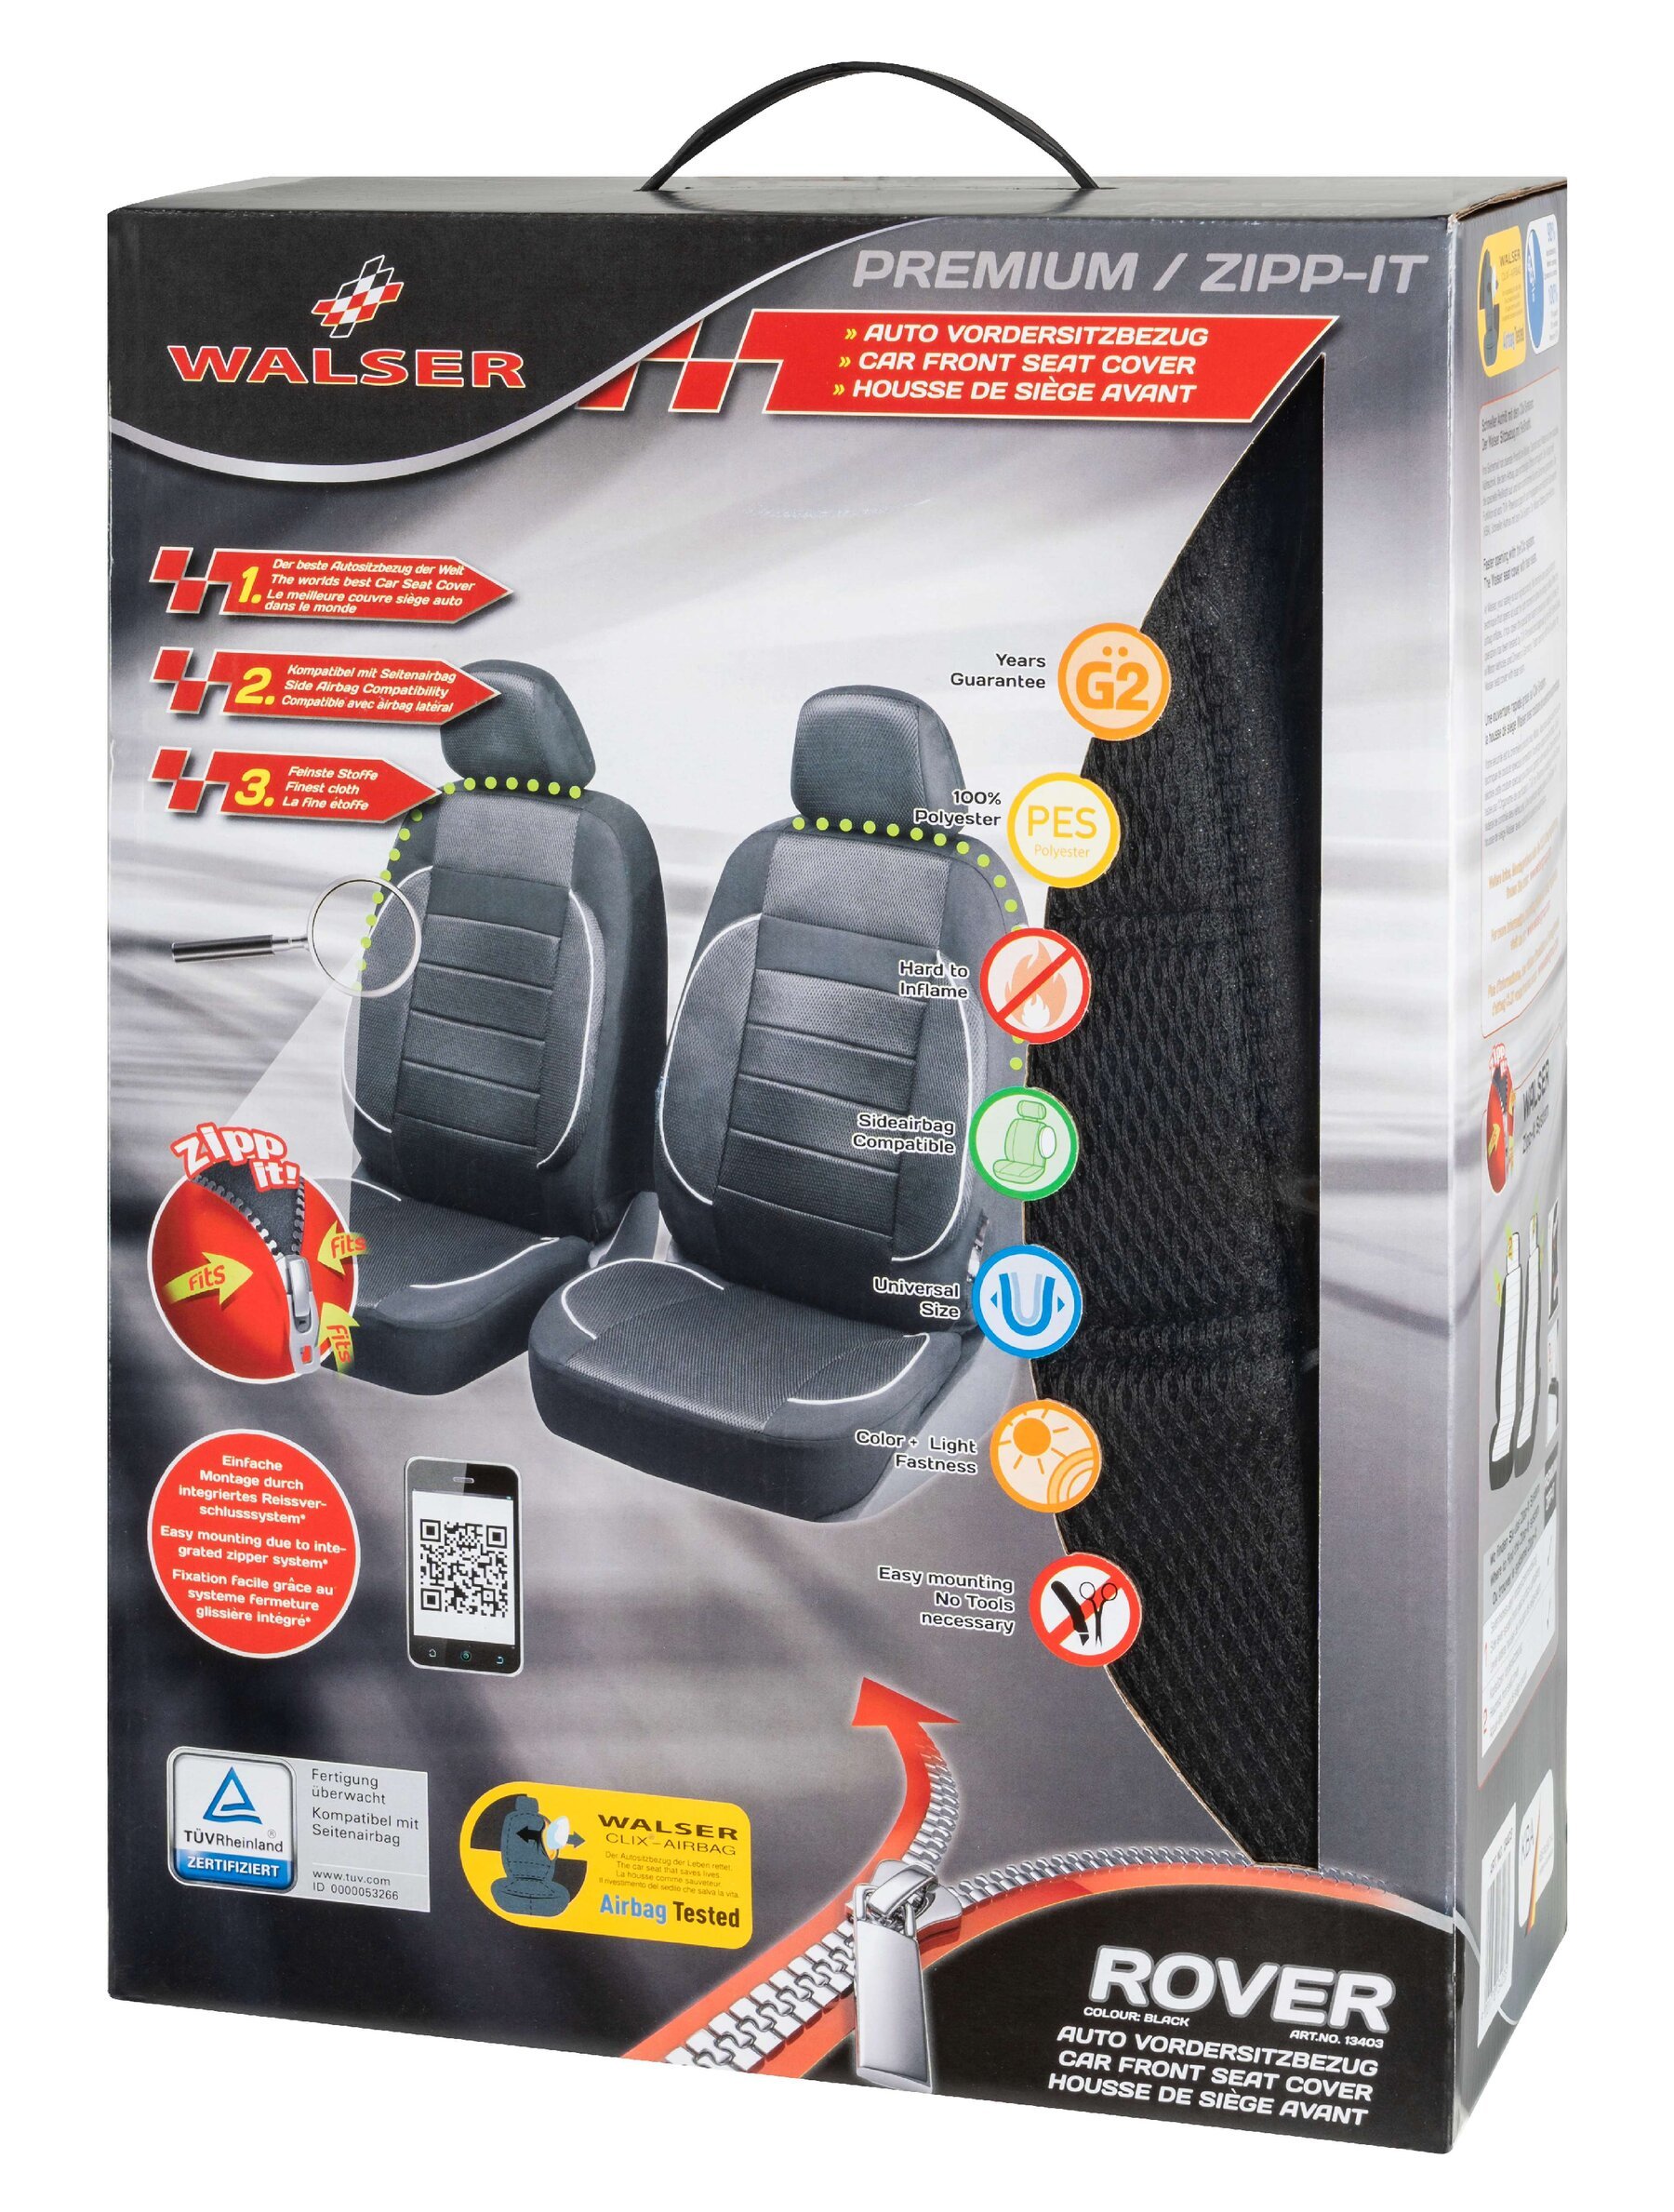 ZIPP IT Premium Rover Car Seat covers for two front seats with zipper system